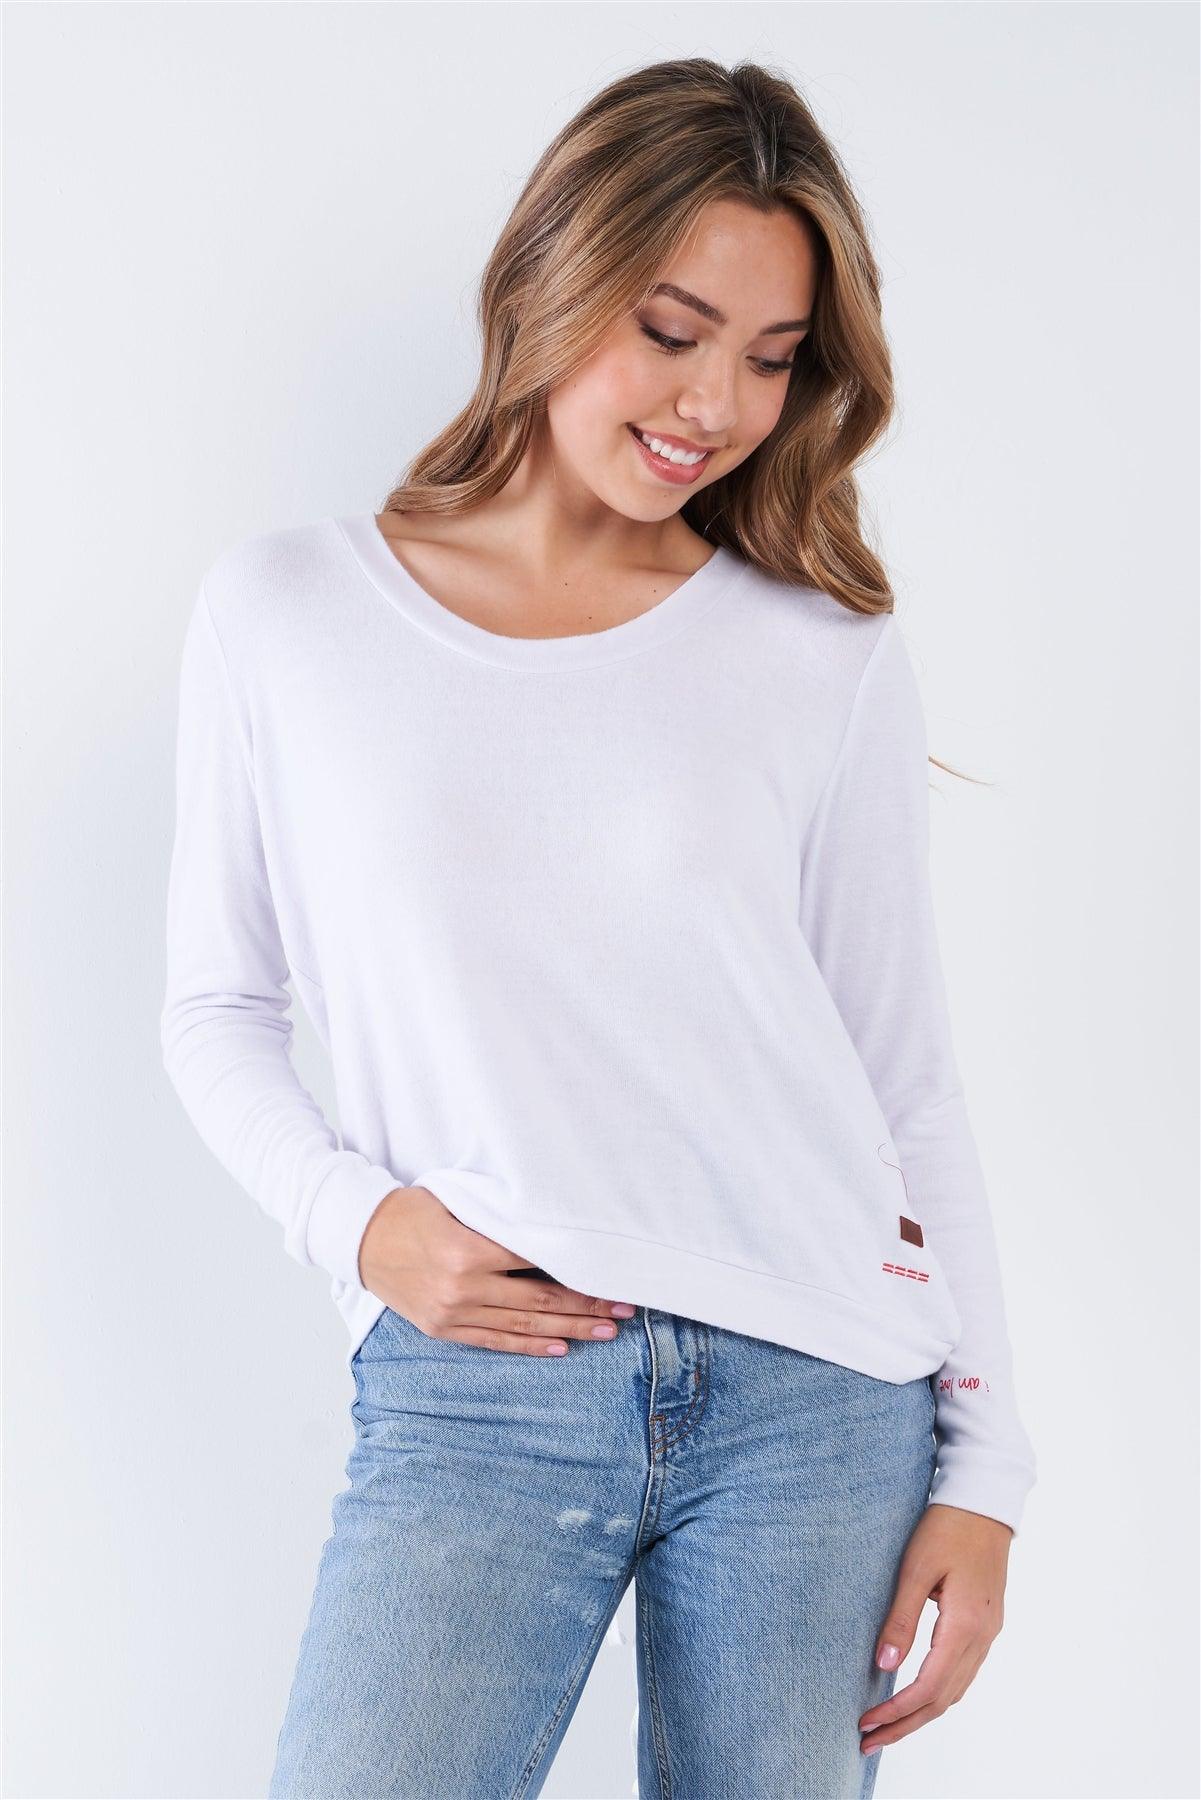 White Long Sleeve Scoop Neck Lace Up Back Top